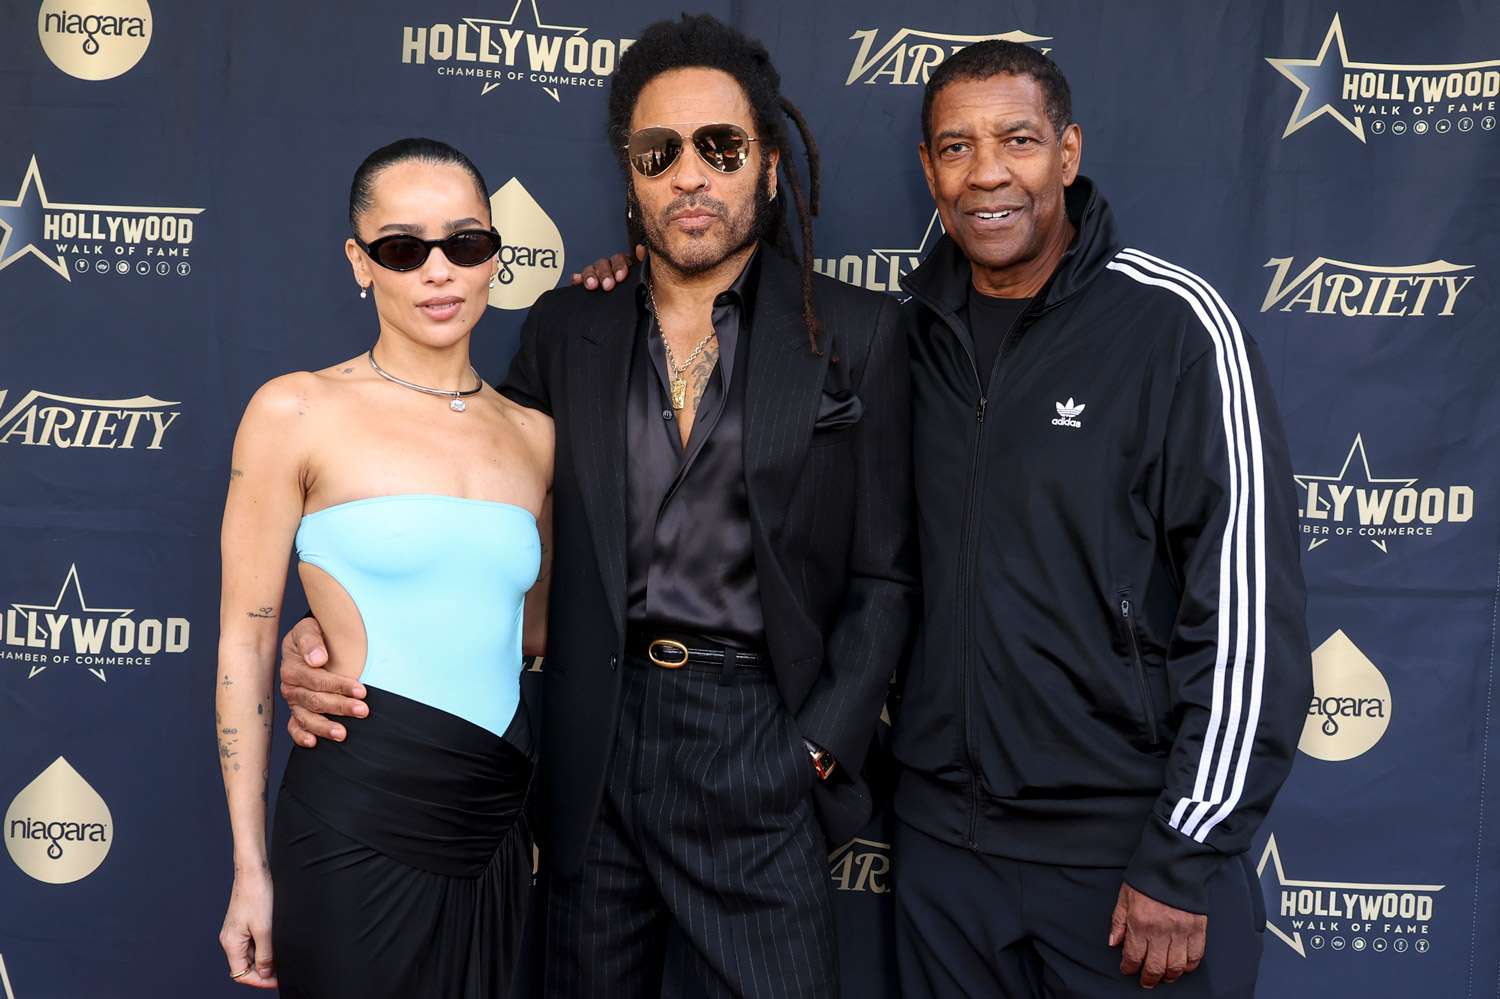 Zoe Kravitz, Lenny Kravitz and Denzel Washington at the star ceremony where Lenny Kravitz is honored with a star on the Hollywood Walk of Fame on March 12, 2024